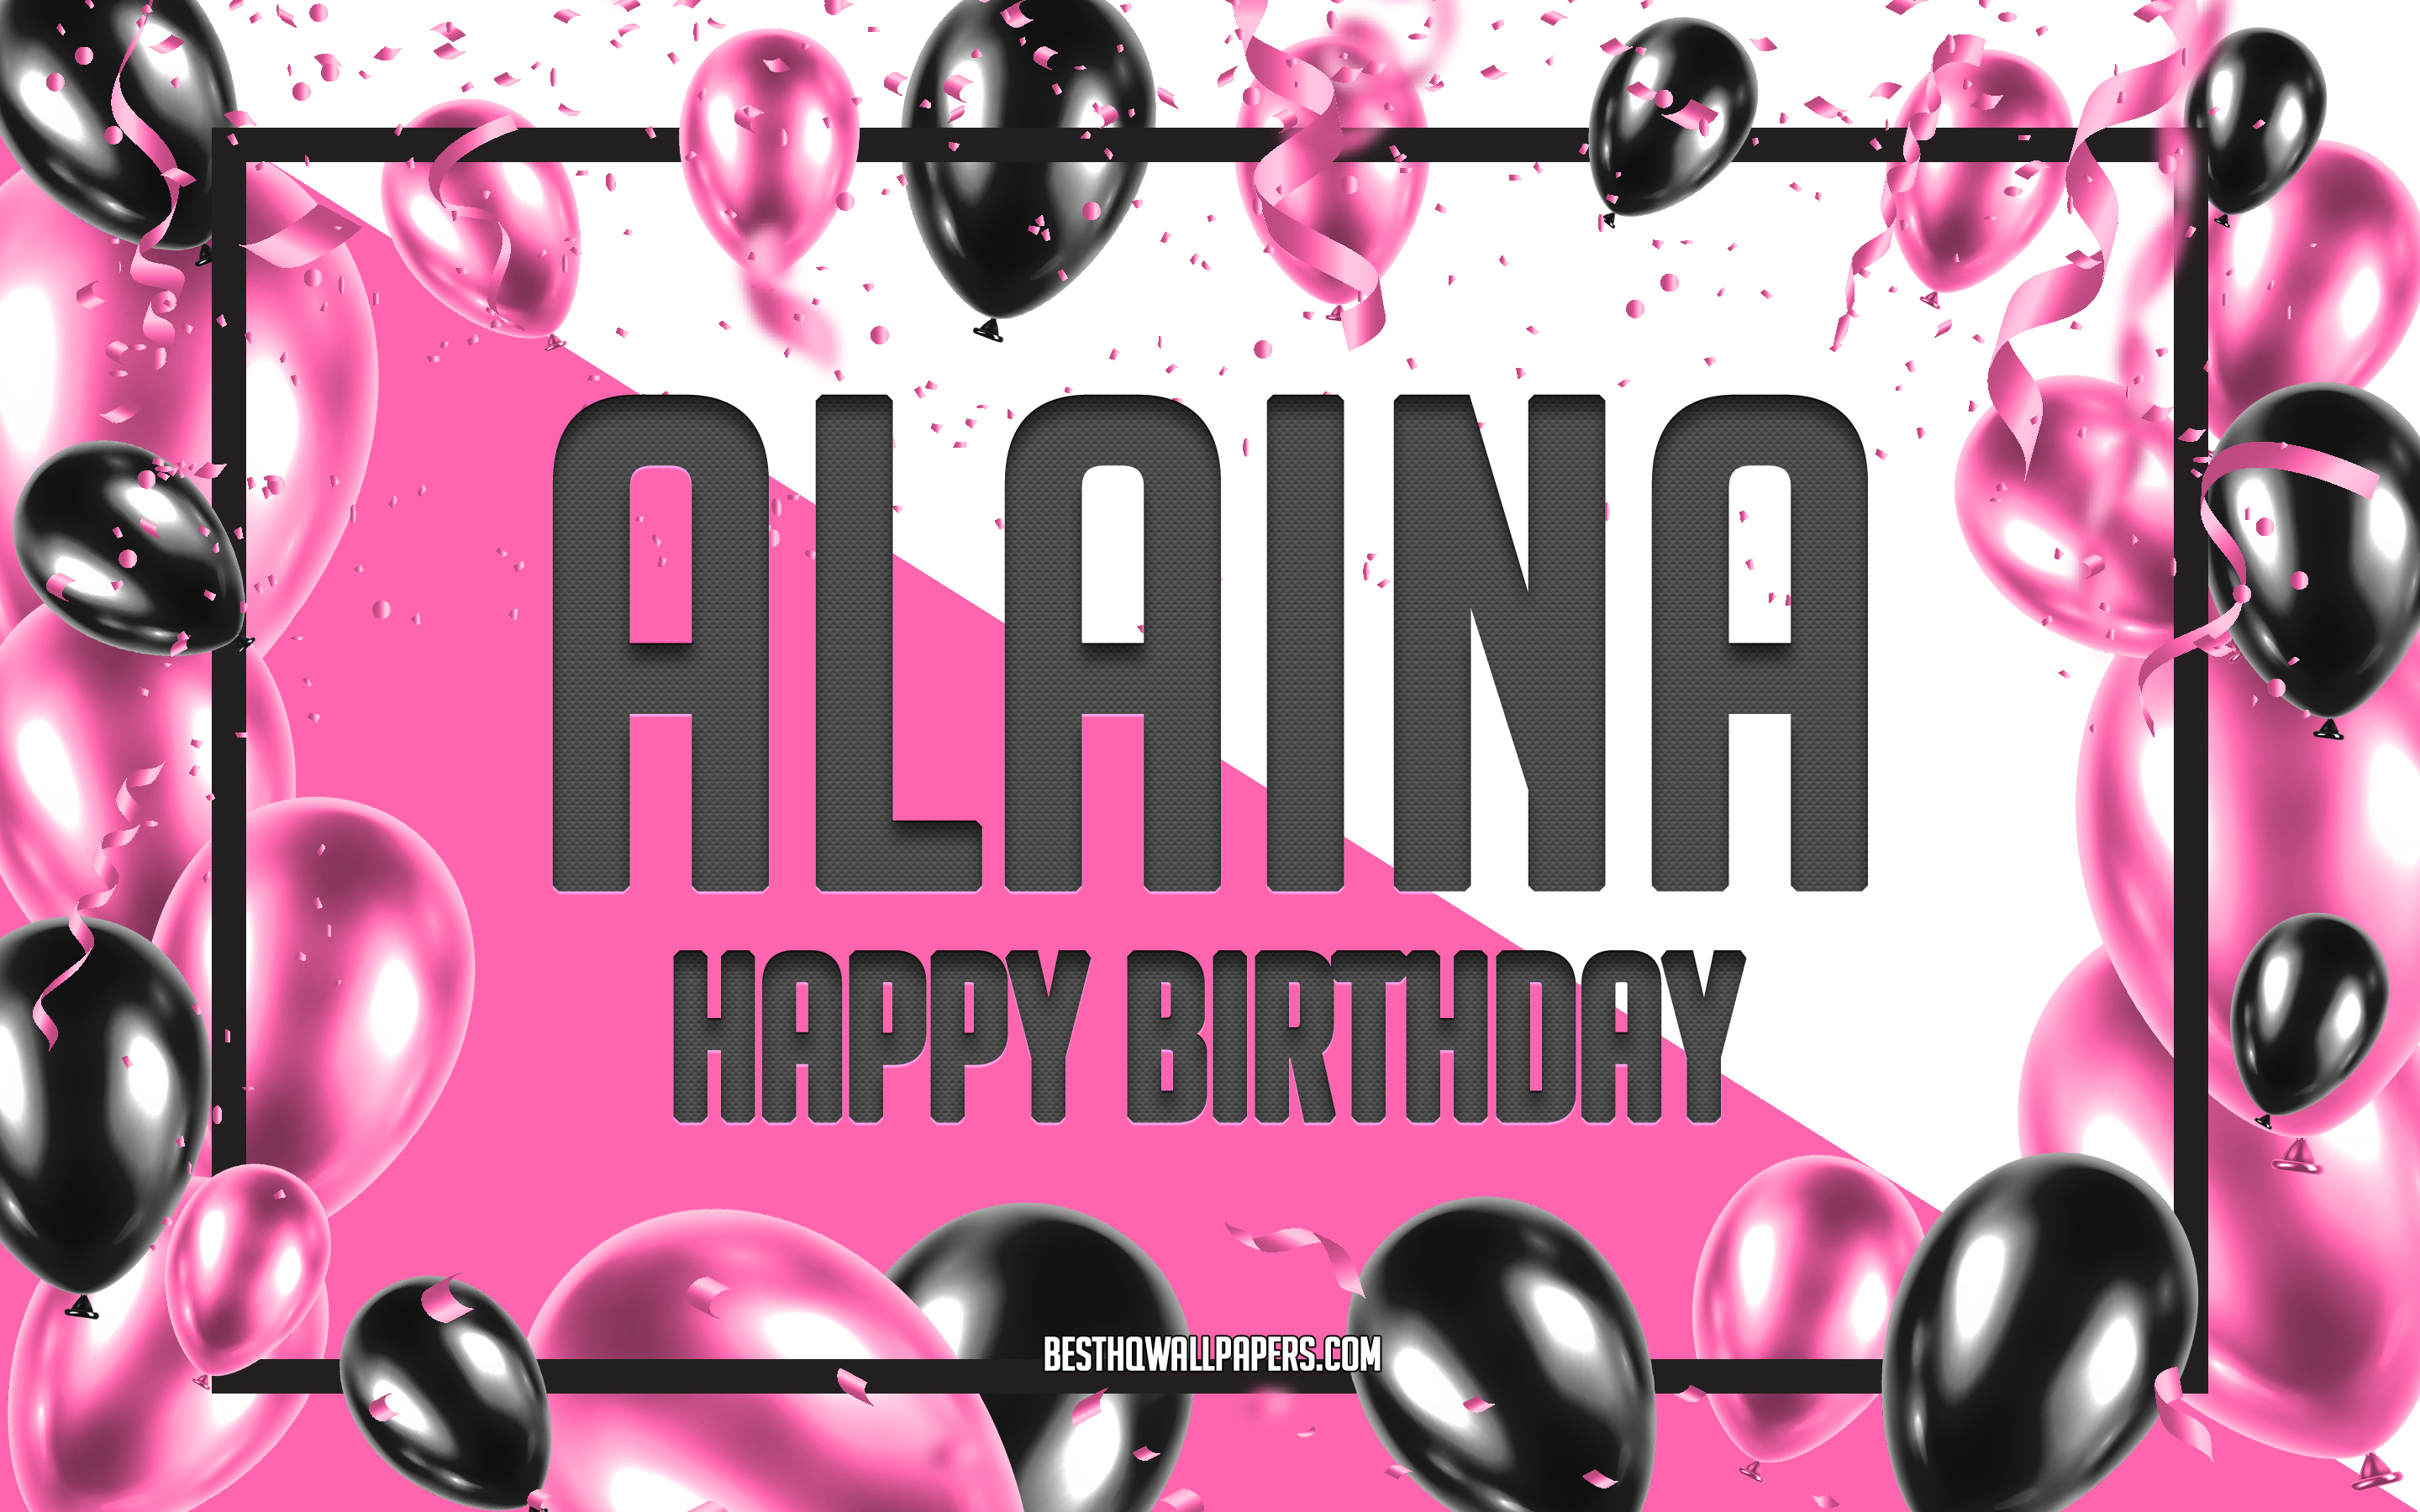 Download Wallpapers Happy Birthday Alaina Birthday Balloons Background Alaina Wallpapers With